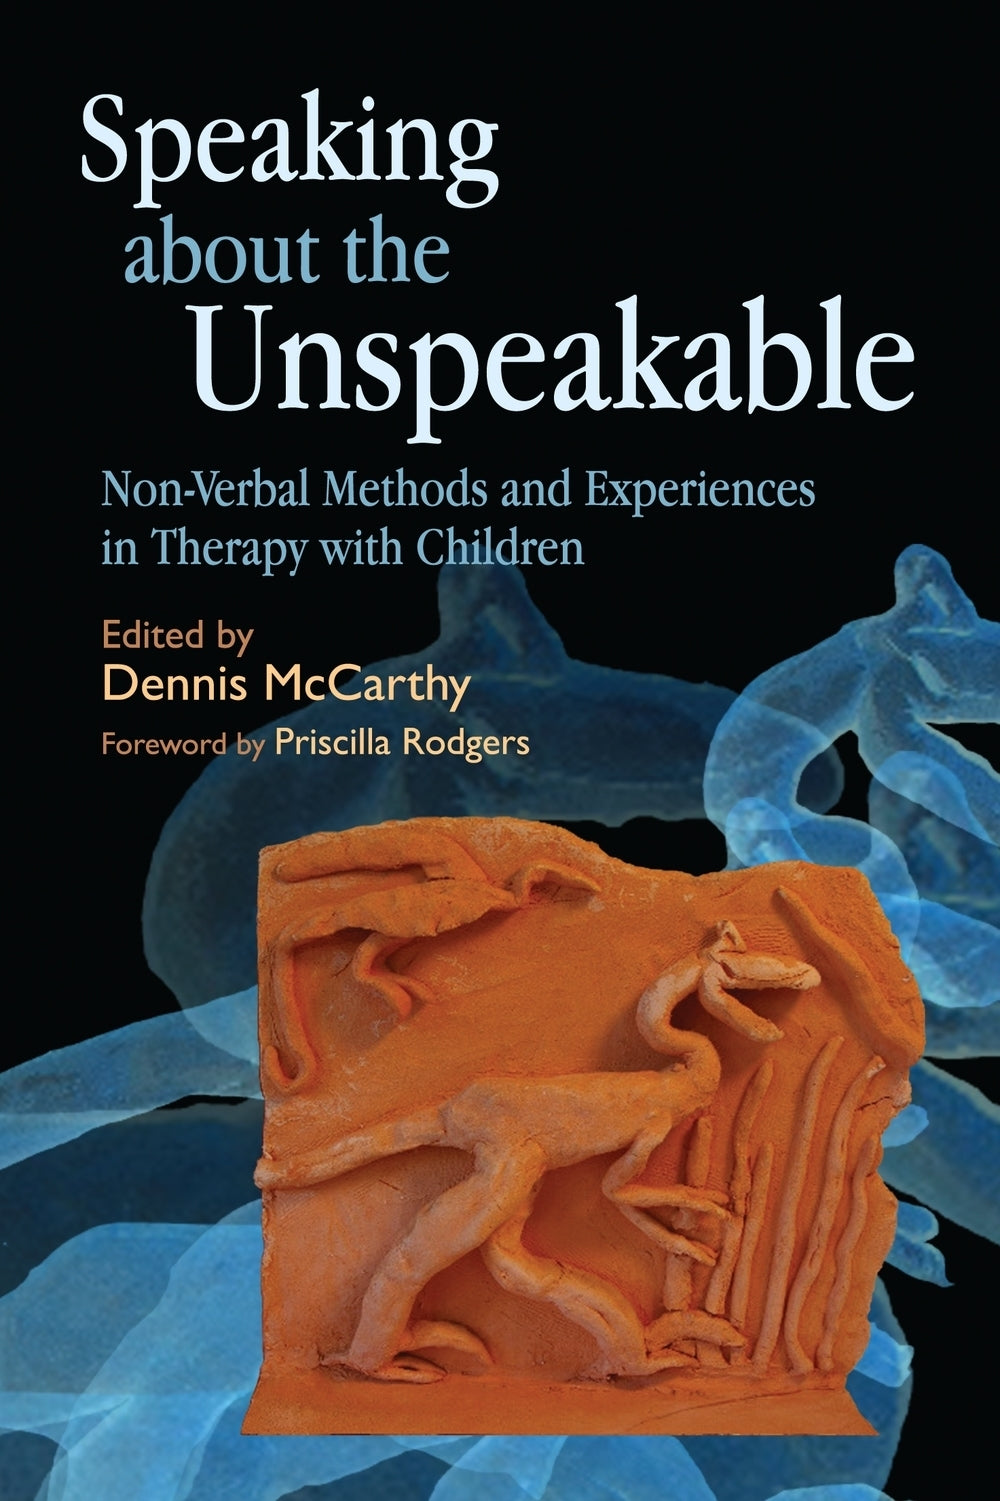 Speaking about the Unspeakable by Dennis McCarthy